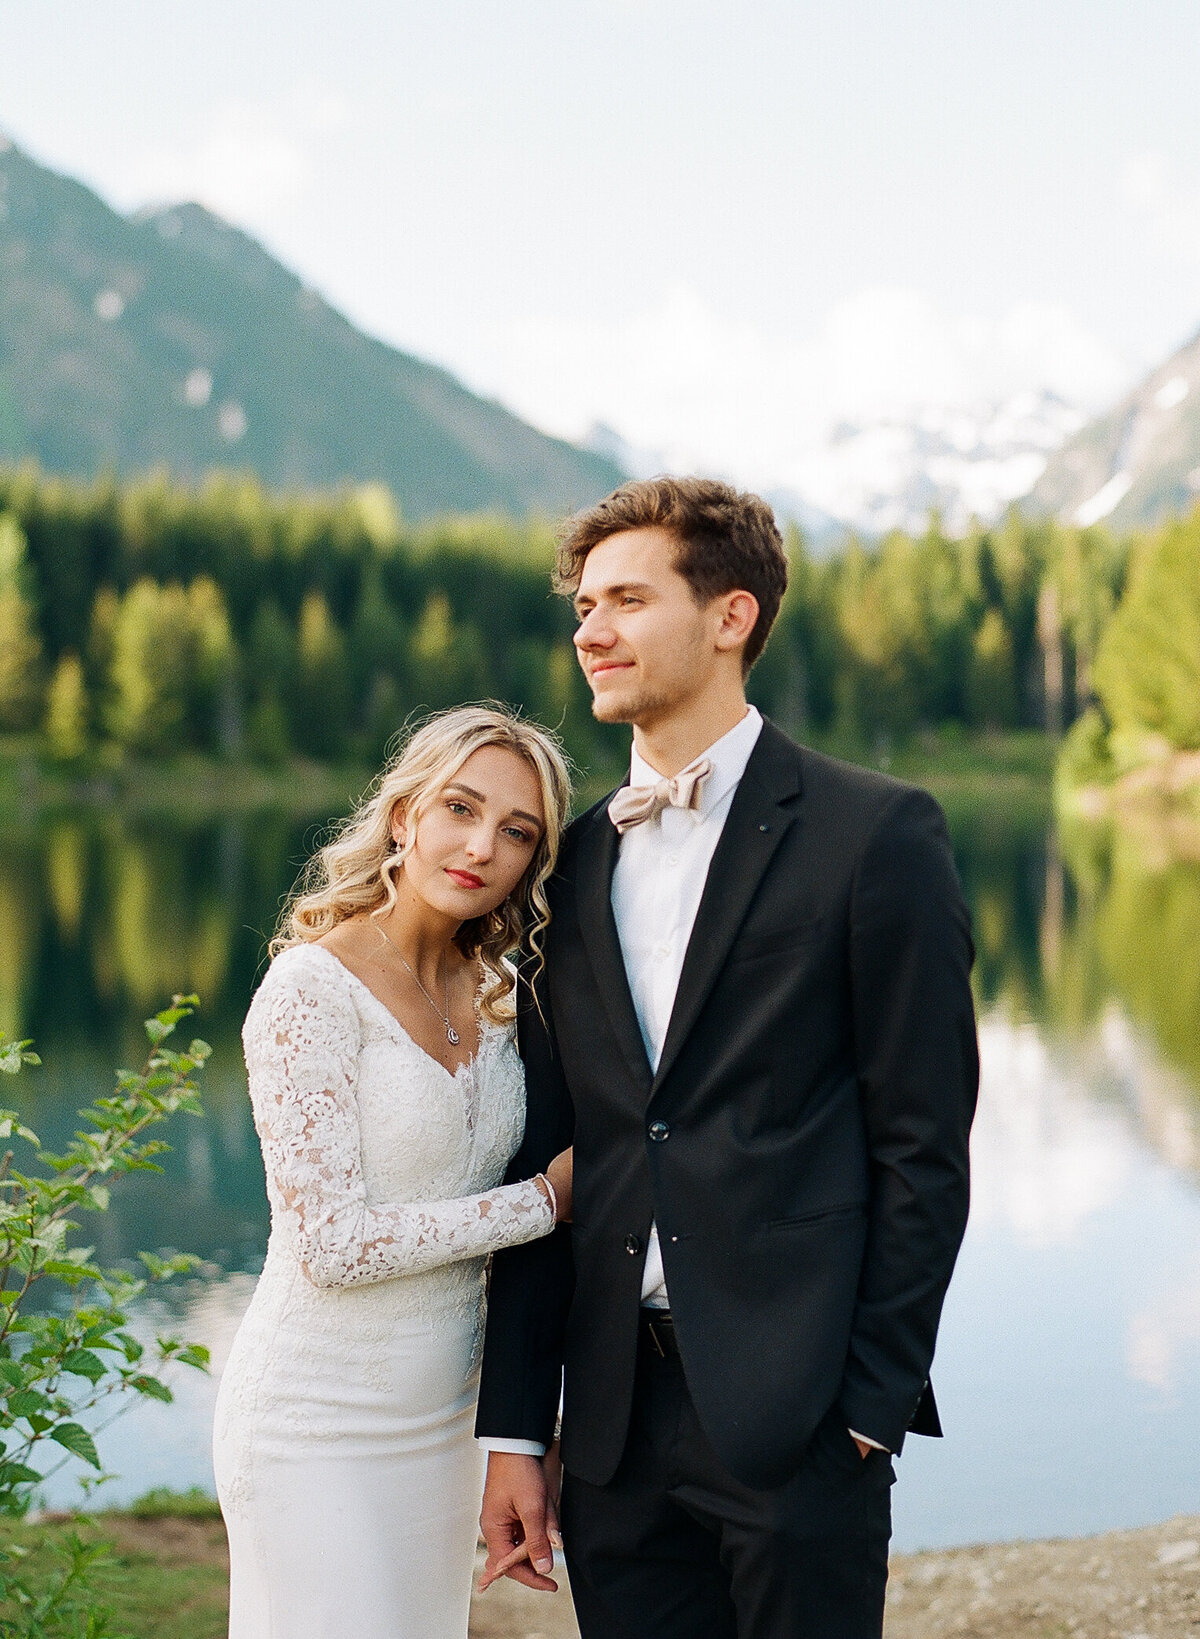 elopement photography poses in gold creek pond in washington state